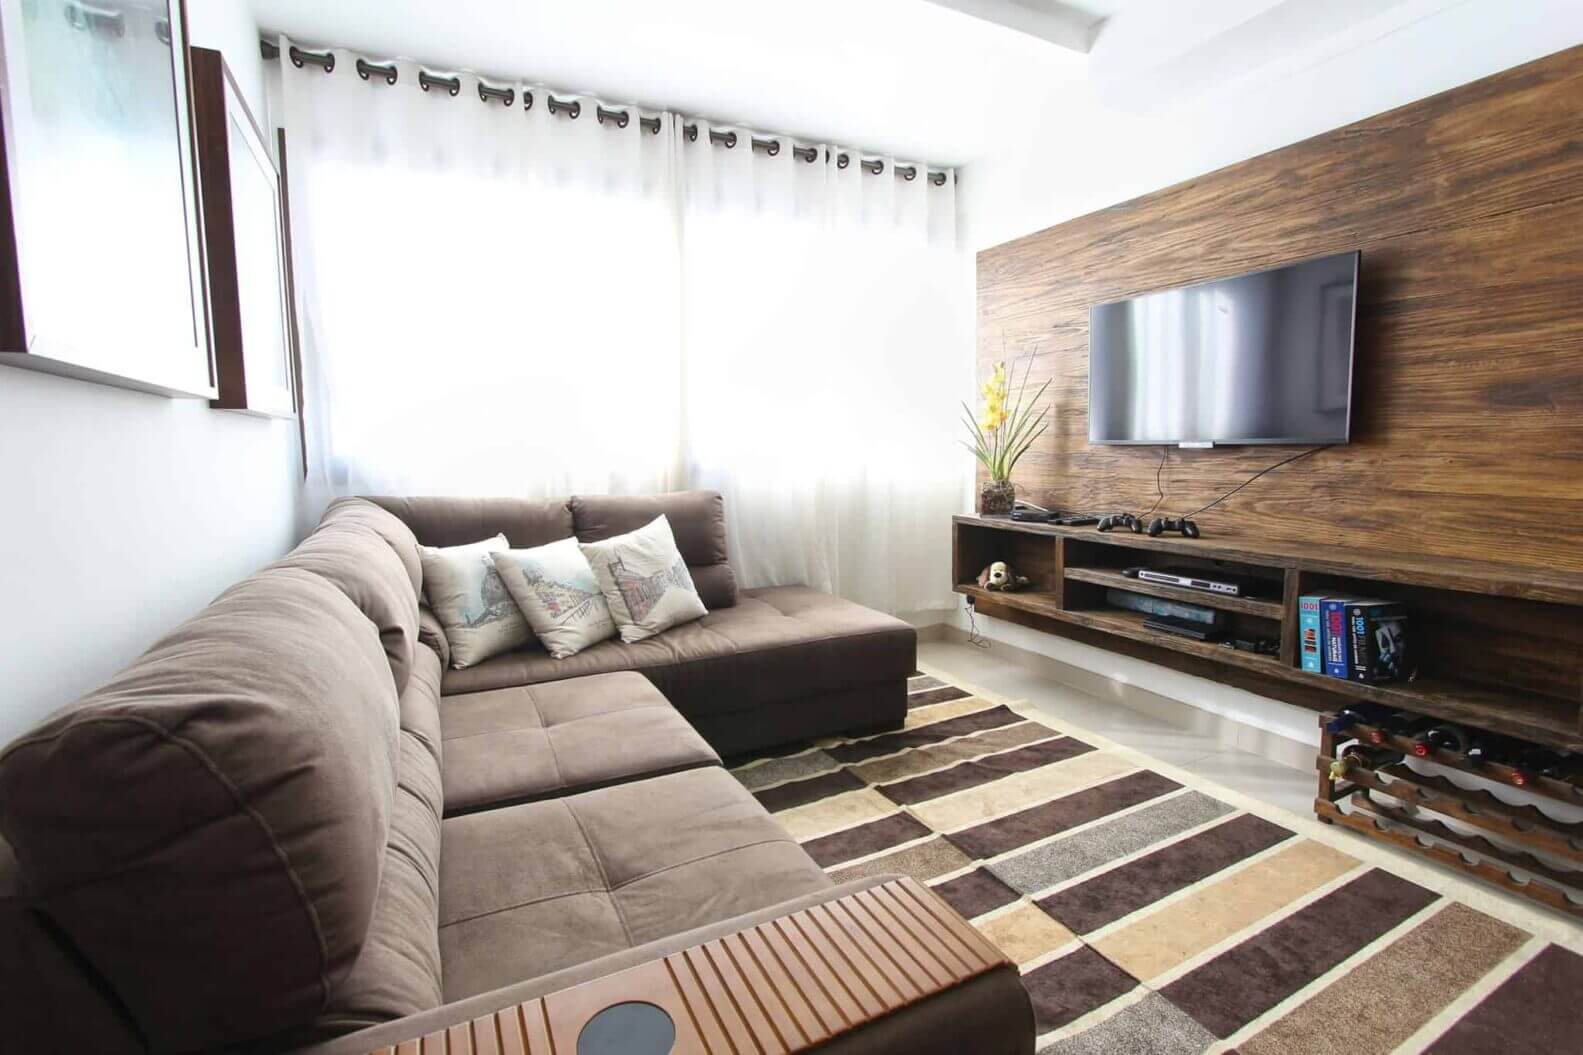 Call Us Now, And At Reasonable Prices, Get The Best TV Wall Mount Installation